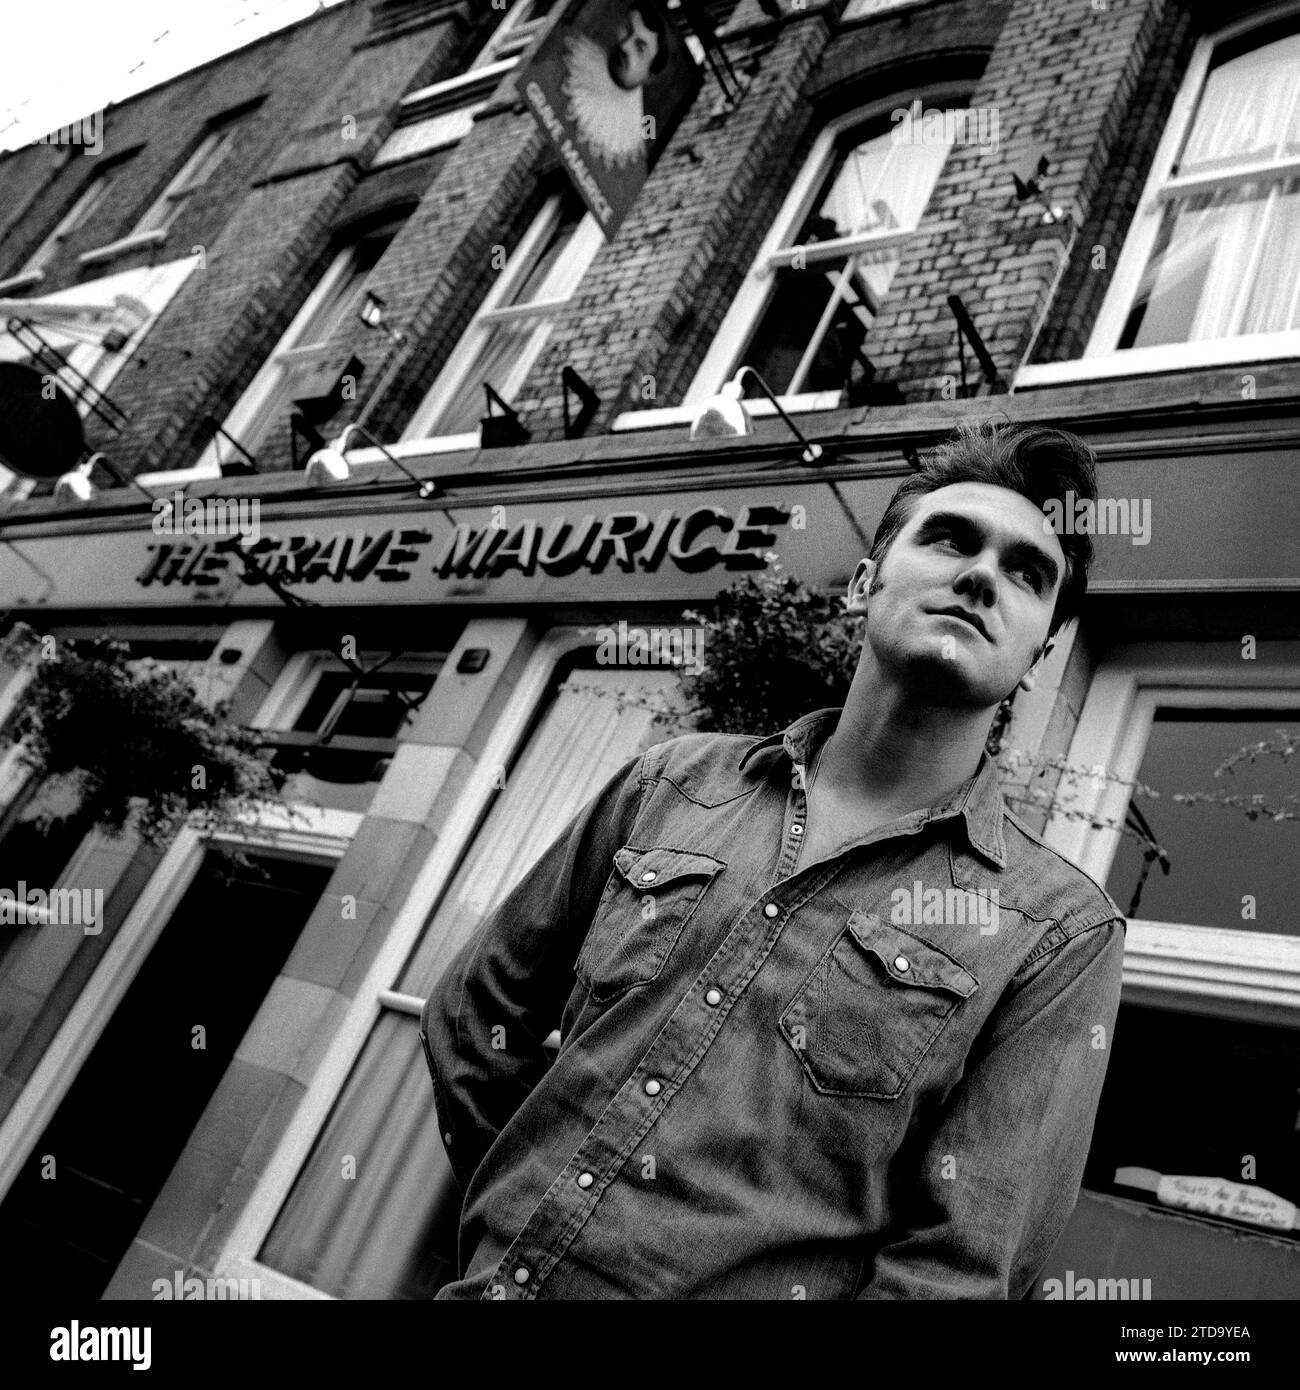 Powerful Black & white mid-shot portrait of legendary rockstar, singer/songwriter Morrissey in denim shirt. shot on the street outside The Grave Maurice pub, Whitechapel in London's East End to promote his single “Sunny” for Parlophone Records 1995. Stock Photo